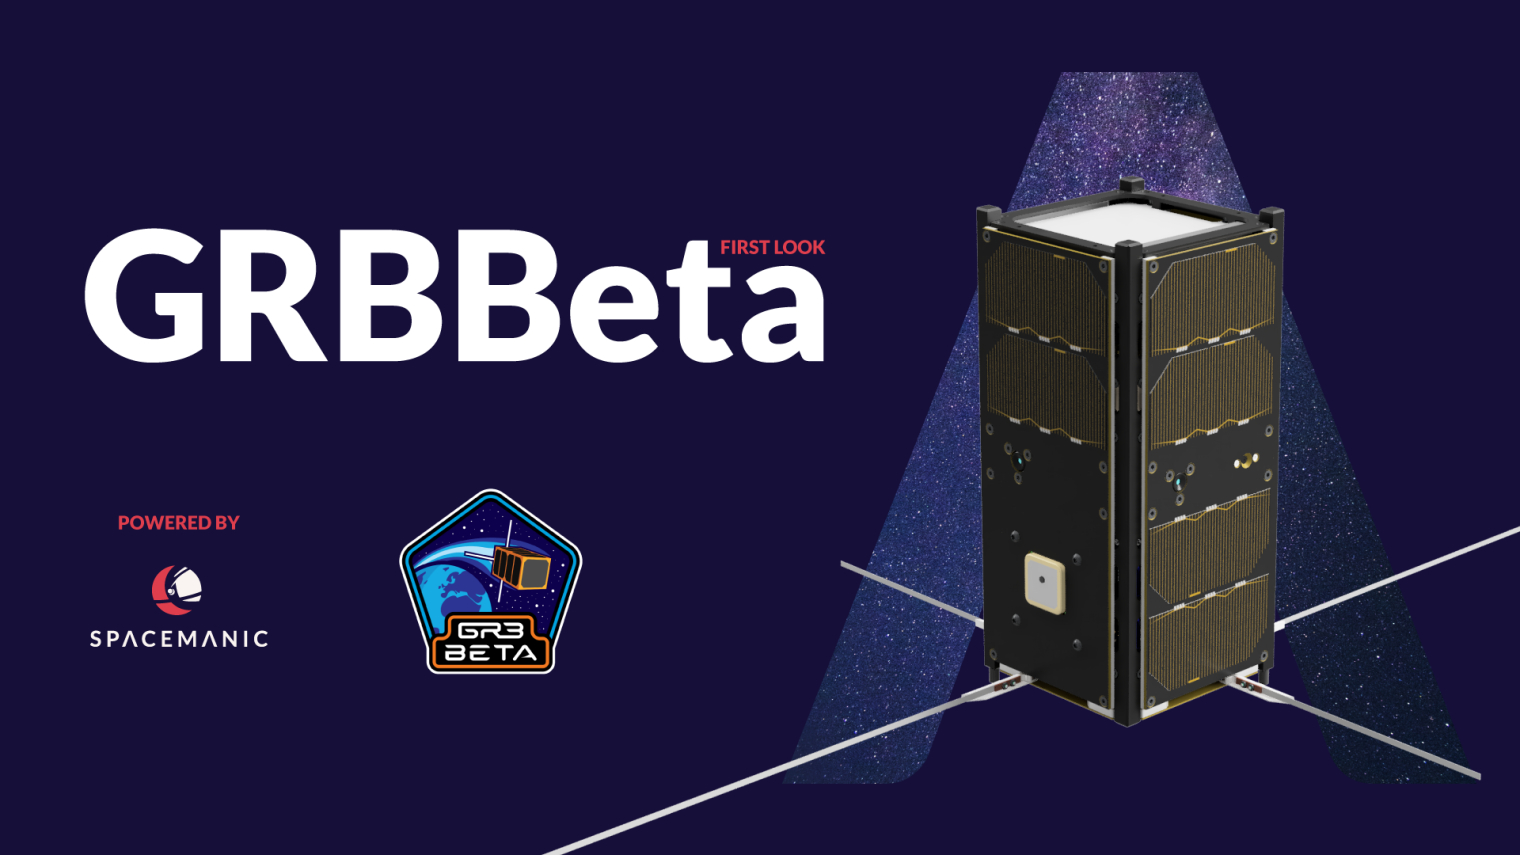 First look at GRBBeta render